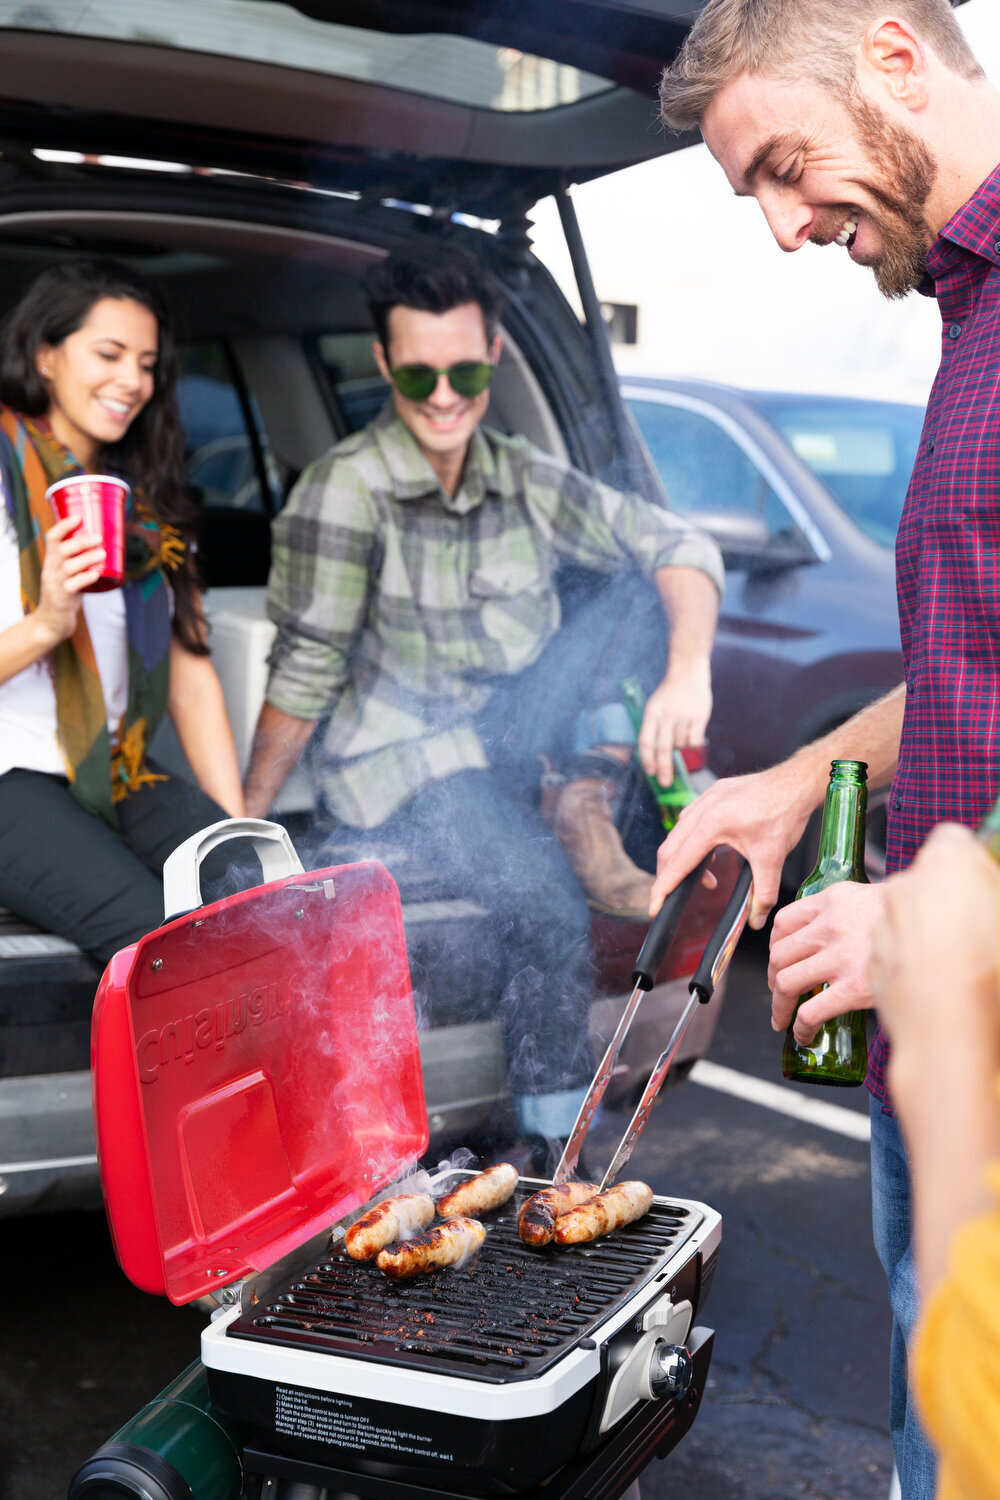 Greer Rivera Commercial Photography Marin CA People tailgating in the back of a vehicle with Cuisinart grill